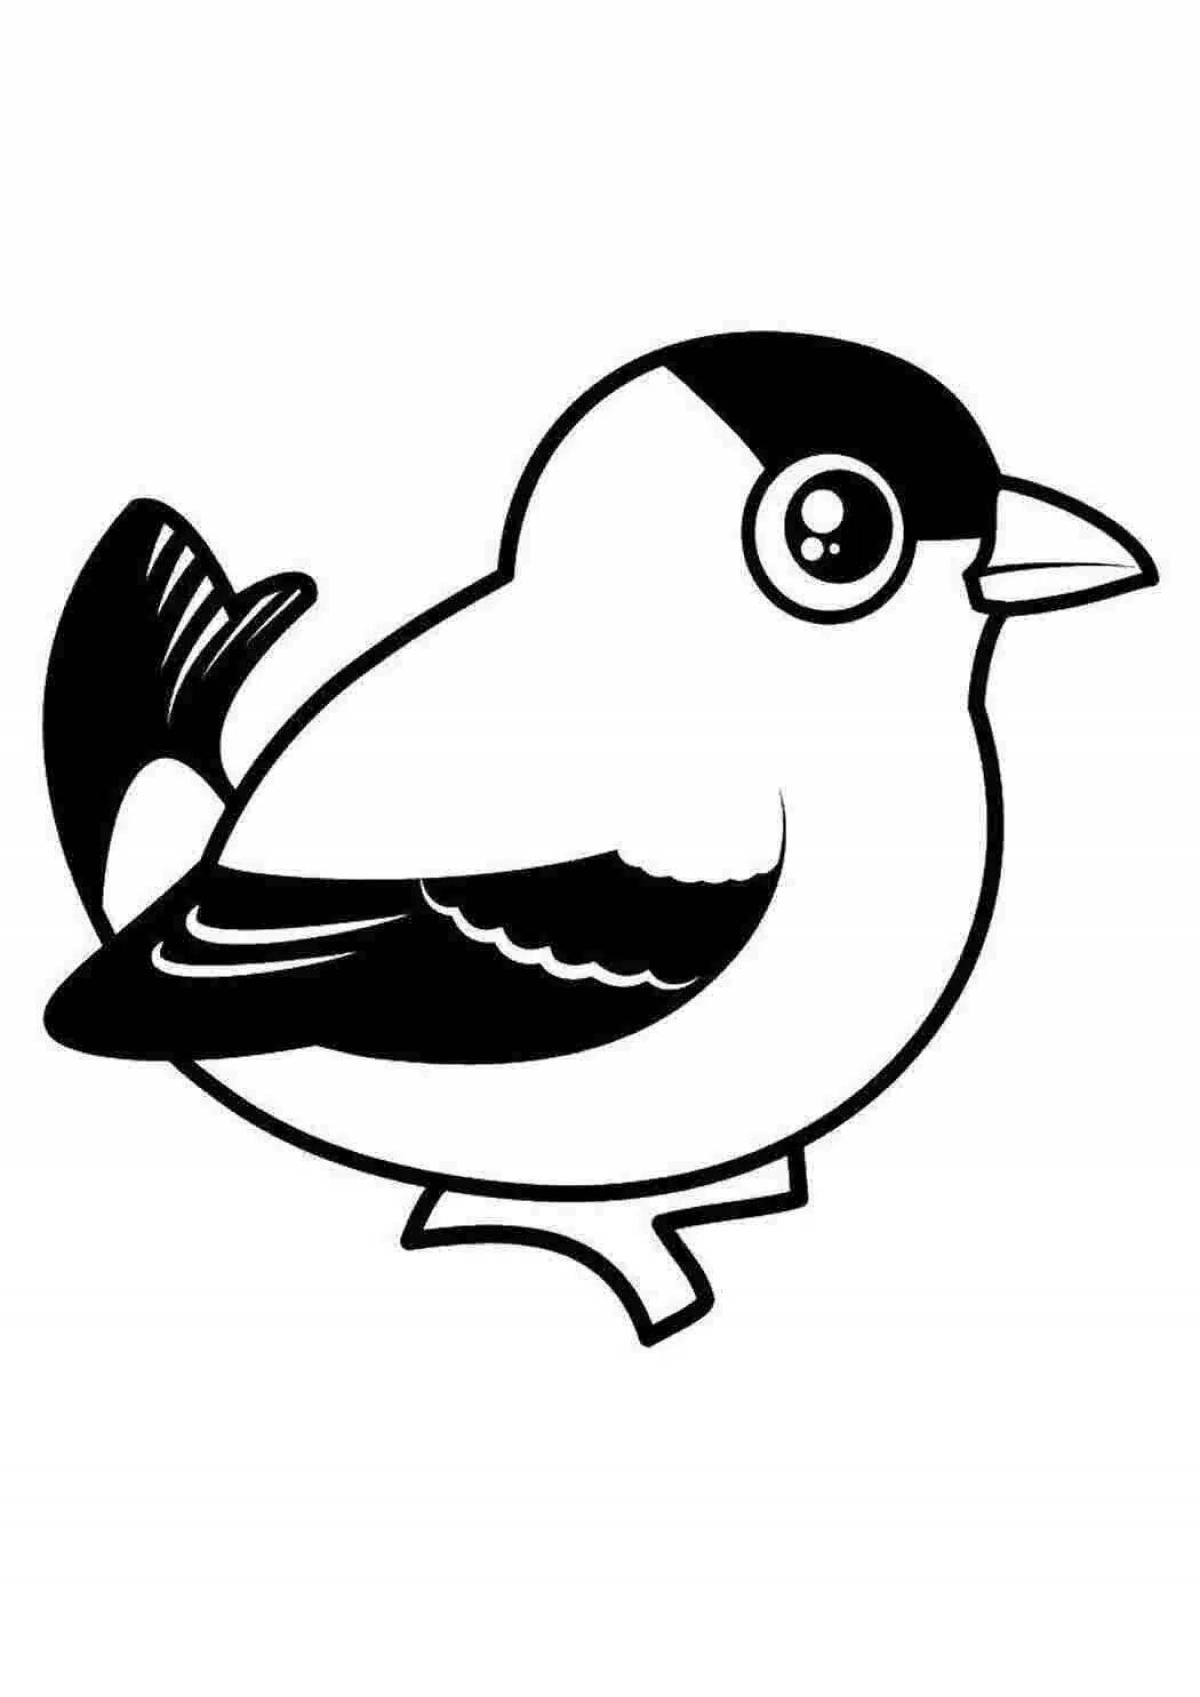 Blissful tit coloring page for kids